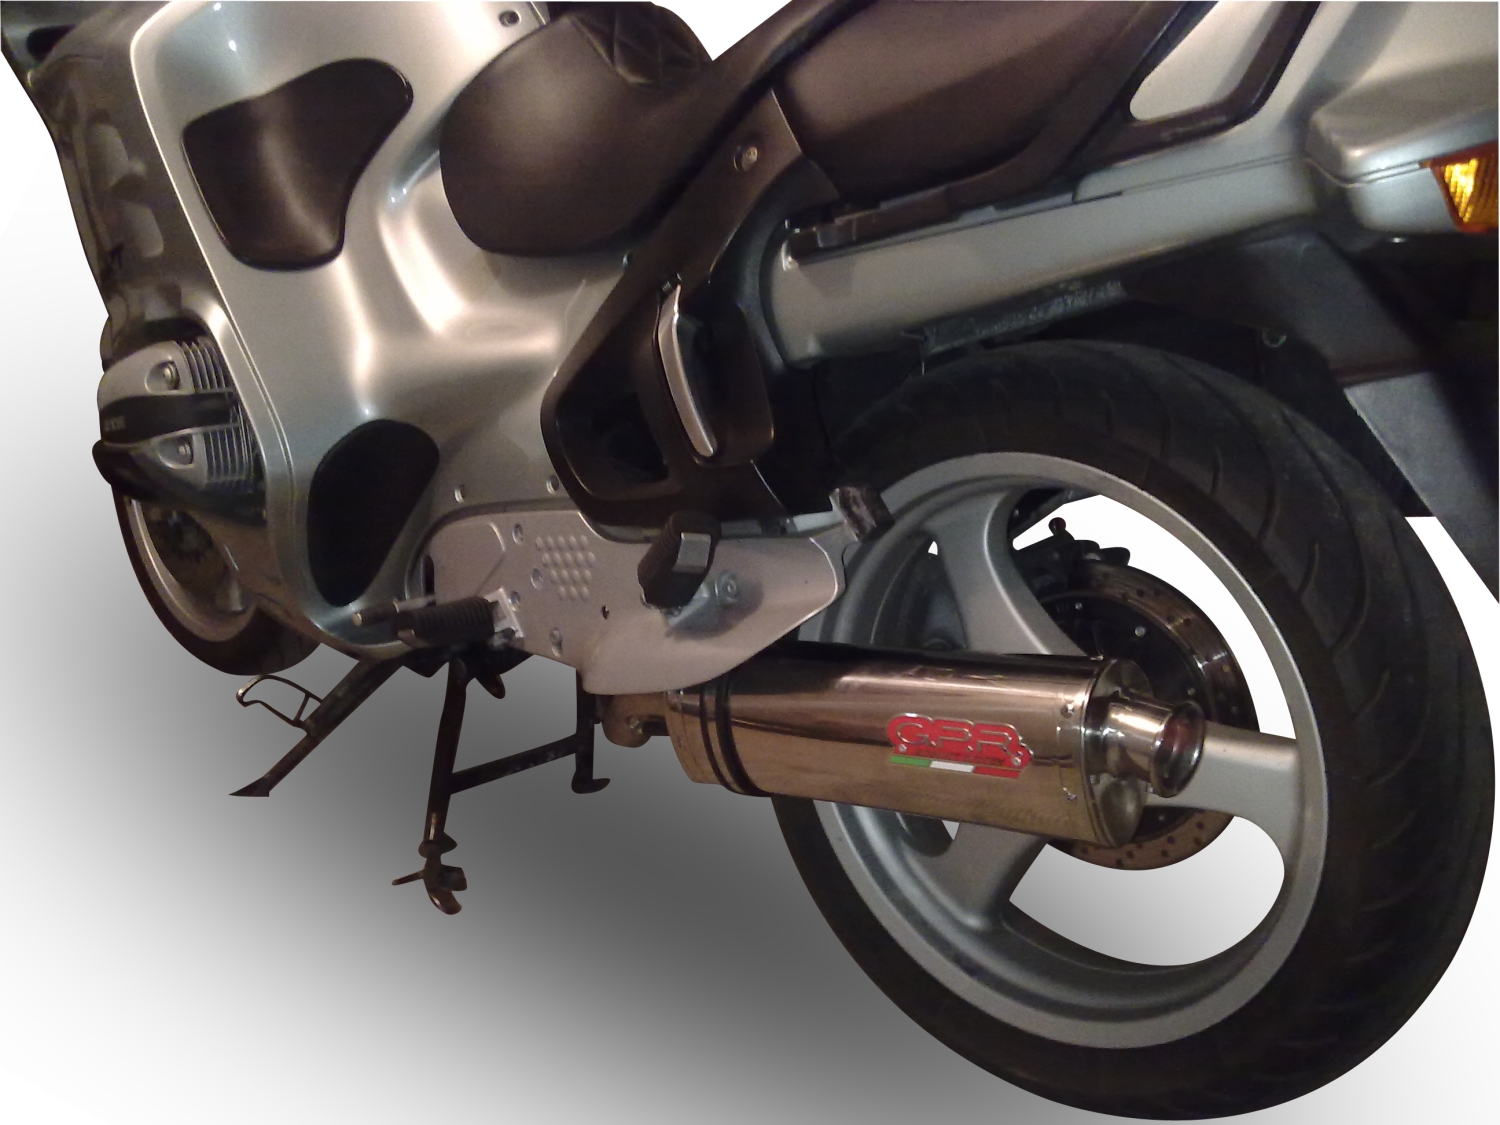 Exhaust system compatible with Bmw R 850 R - GS 1994-2002, Trioval, Homologated legal slip-on exhaust including removable db killer and link pipe 